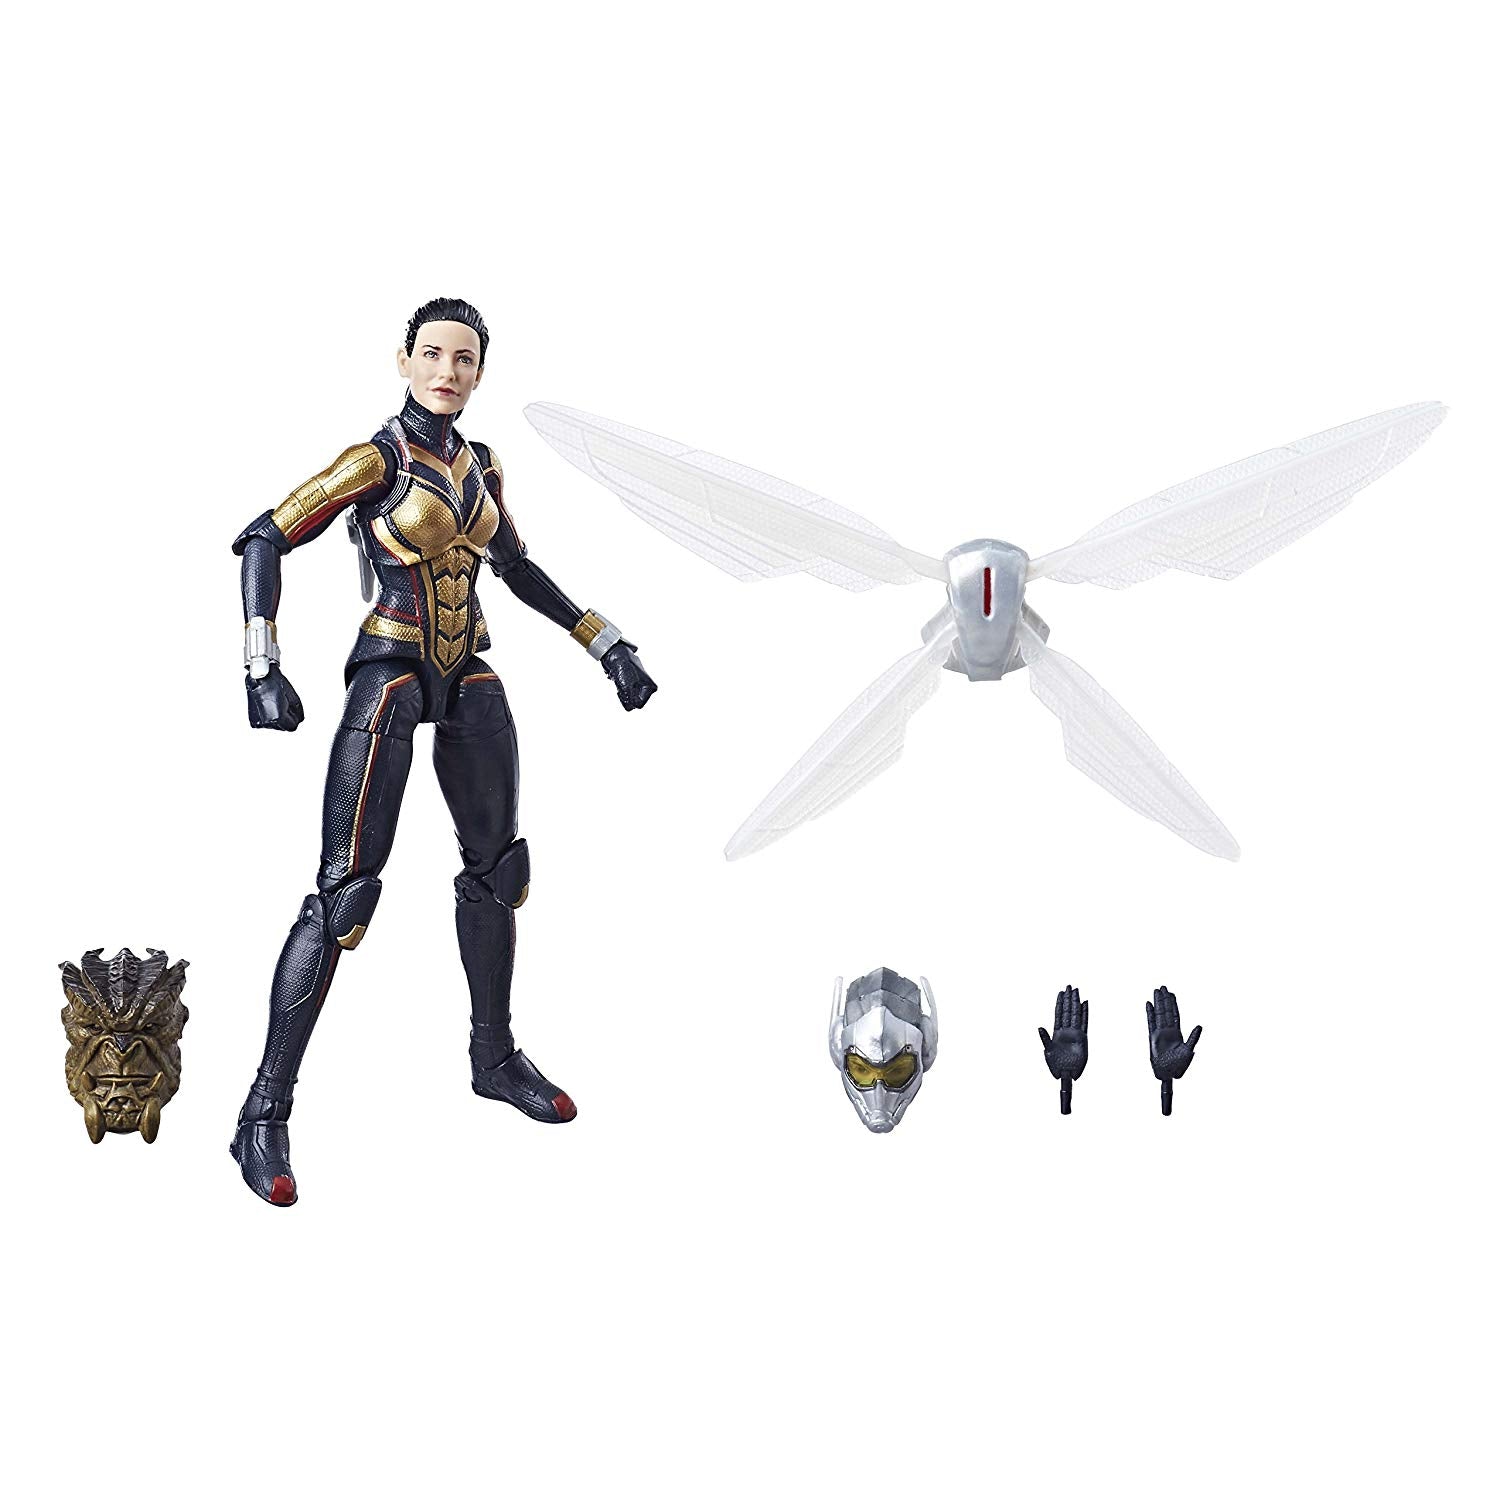 Marvel Legends Marvel's Wasp Ant-Man and The Wasp Cull Obsidian BAF